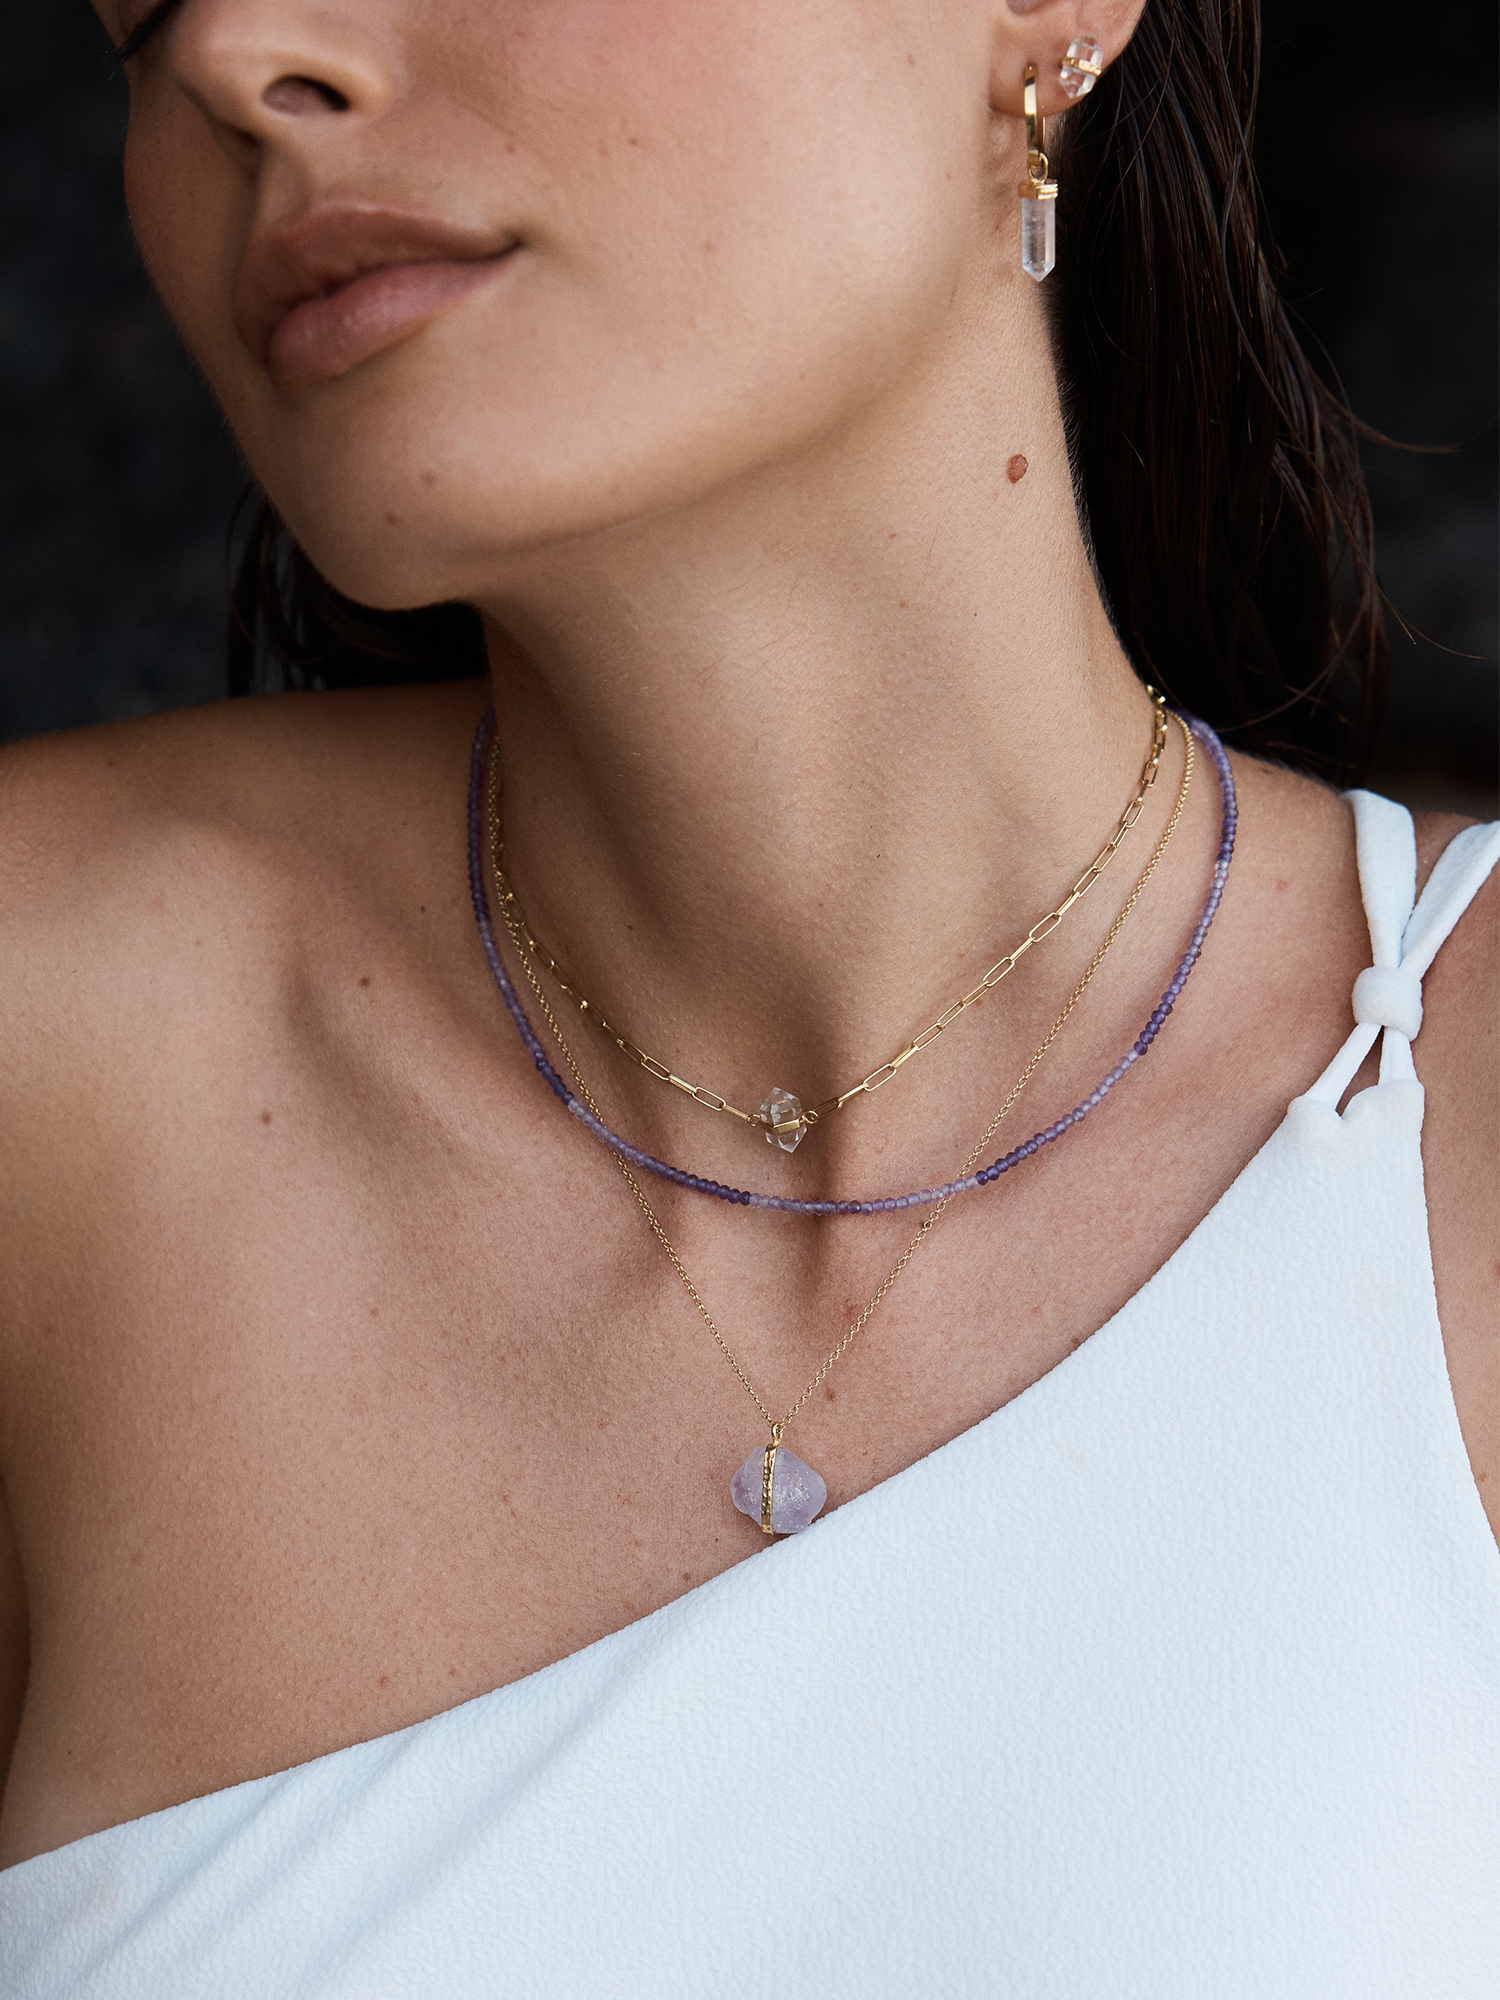 elevate necklace | amethyst